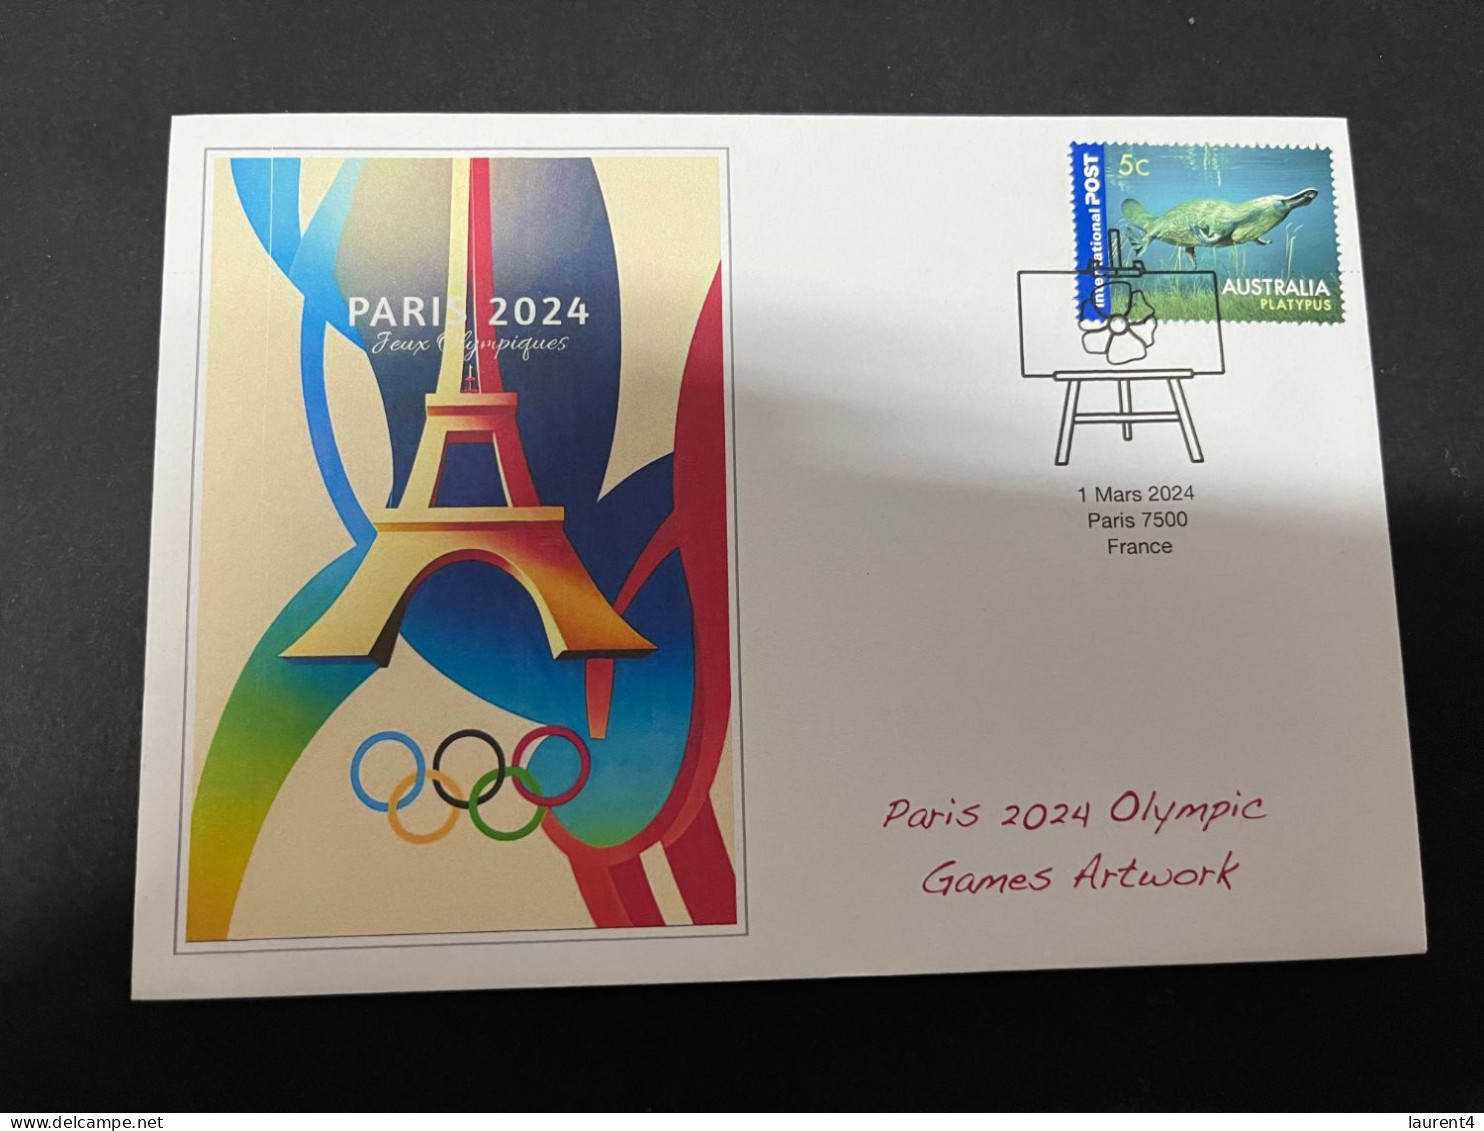 9-3-2024 (2 Y 33) Paris Olympic Games 2024 - 3 (of 12 Covers Series) For The Paris 2024 Olympic Games Artwork - Zomer 2024: Parijs